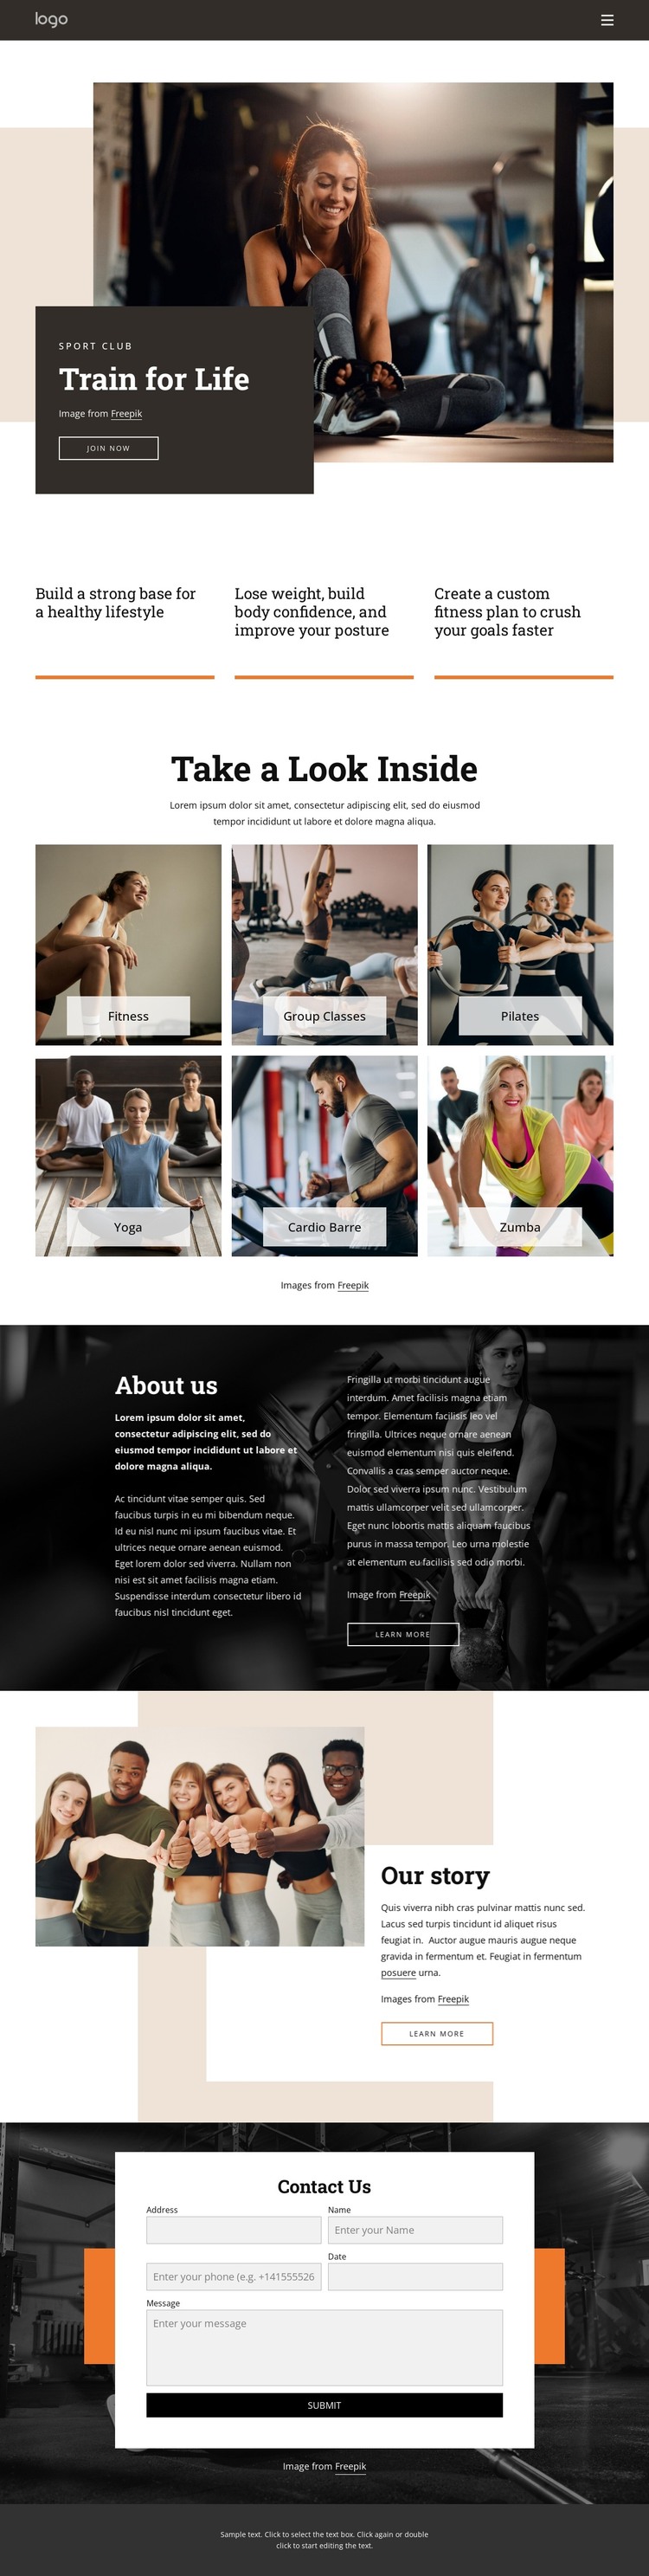 Get moving with our range of classes HTML Template